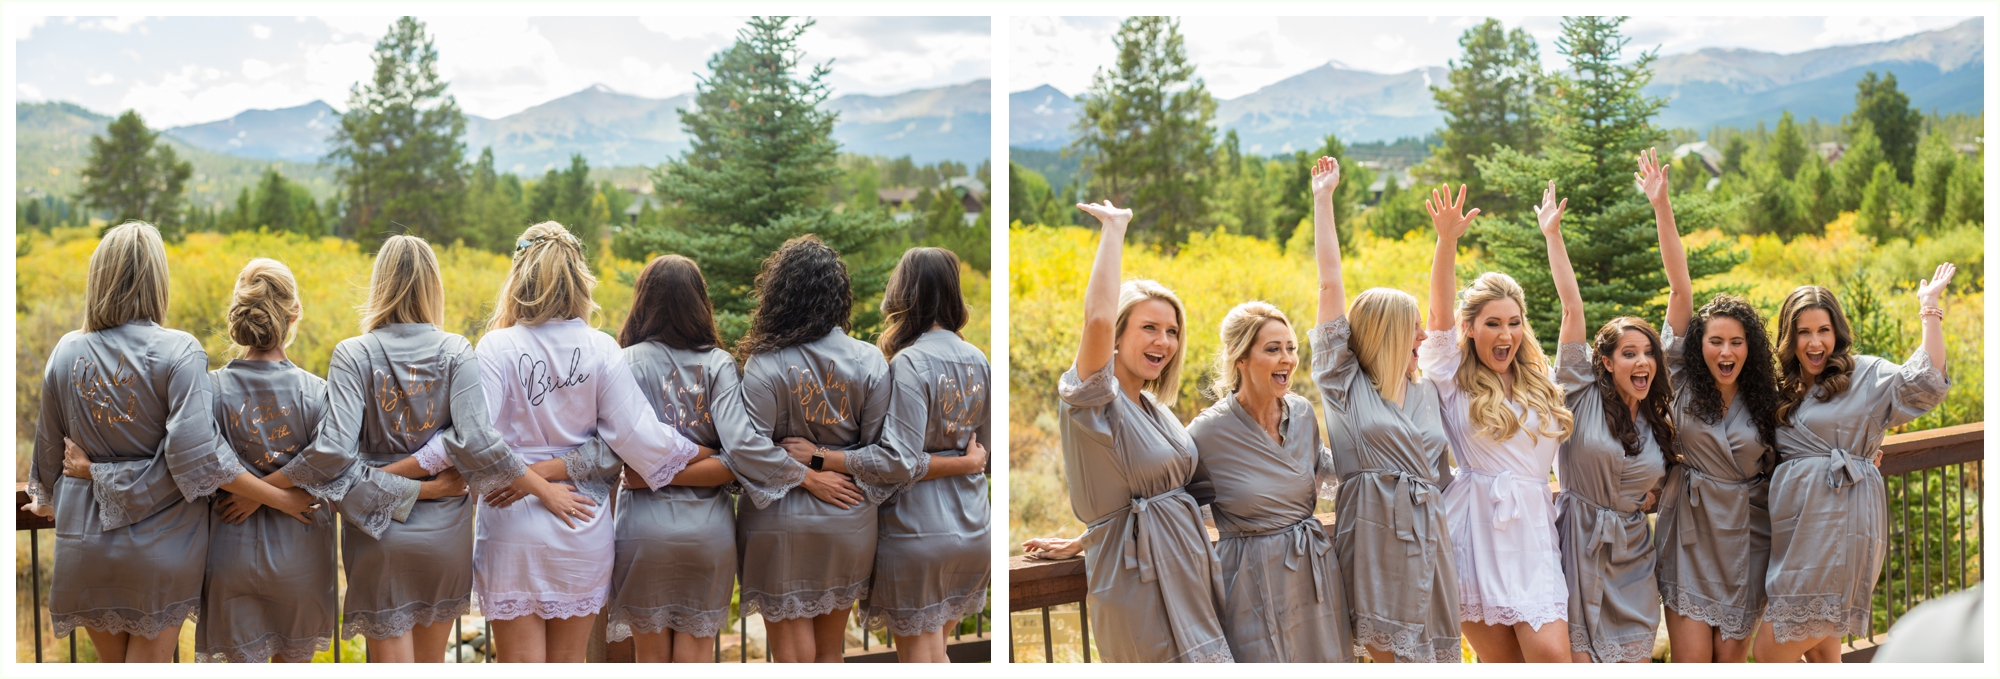 bride with her bridesmaids in matching gray robes with names on the back overlooking mountains of breckenridge colorado mountain wedding photographer kathryn kim